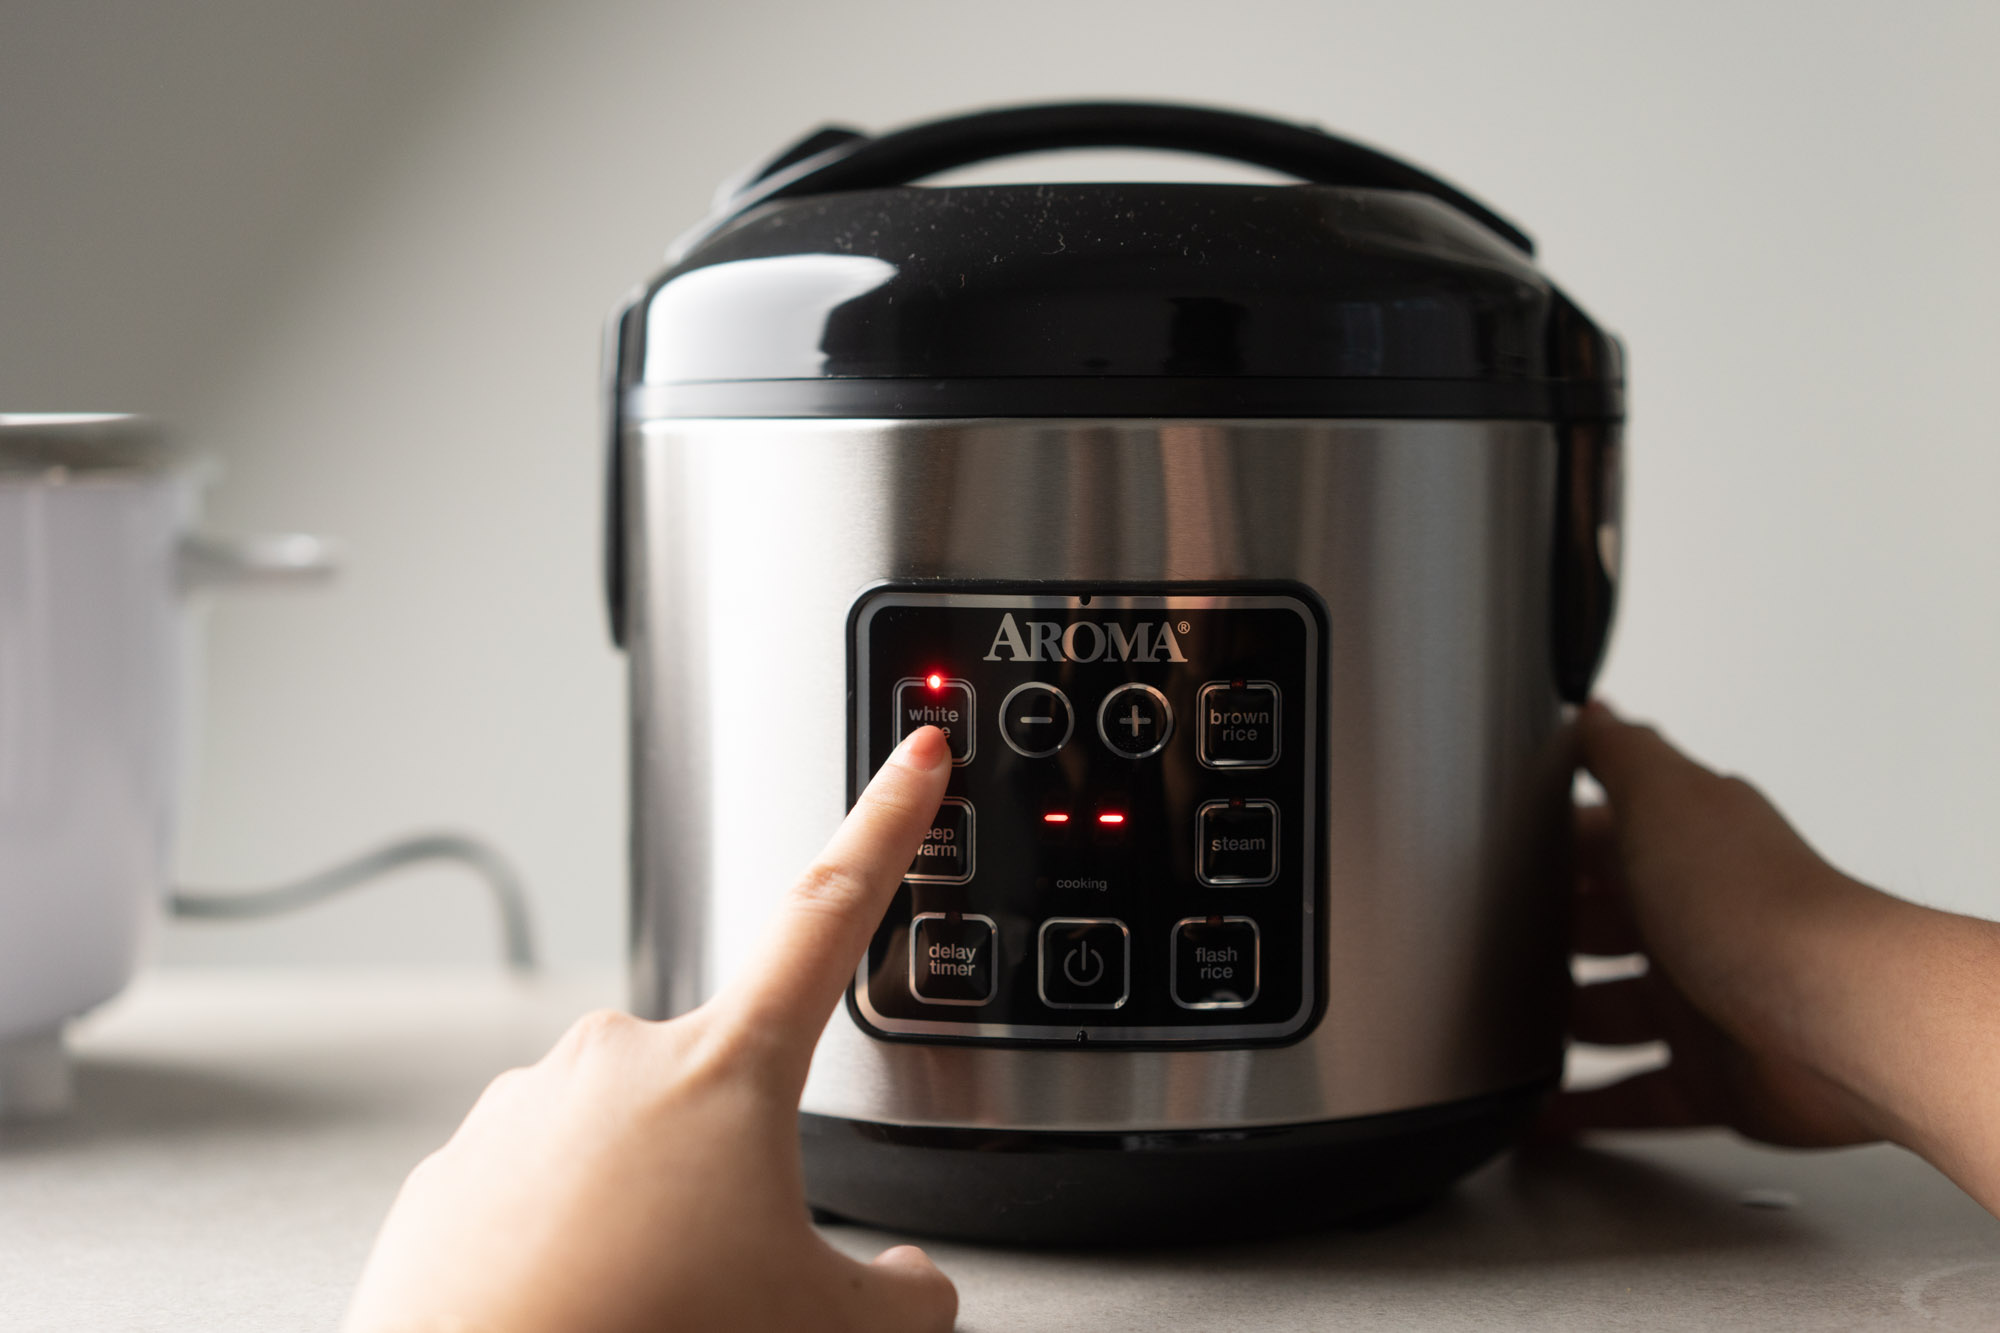 The Asian way to cook rice #ricecooker #perfectrice #asiancooking #gre, Aroma Rice Cooker